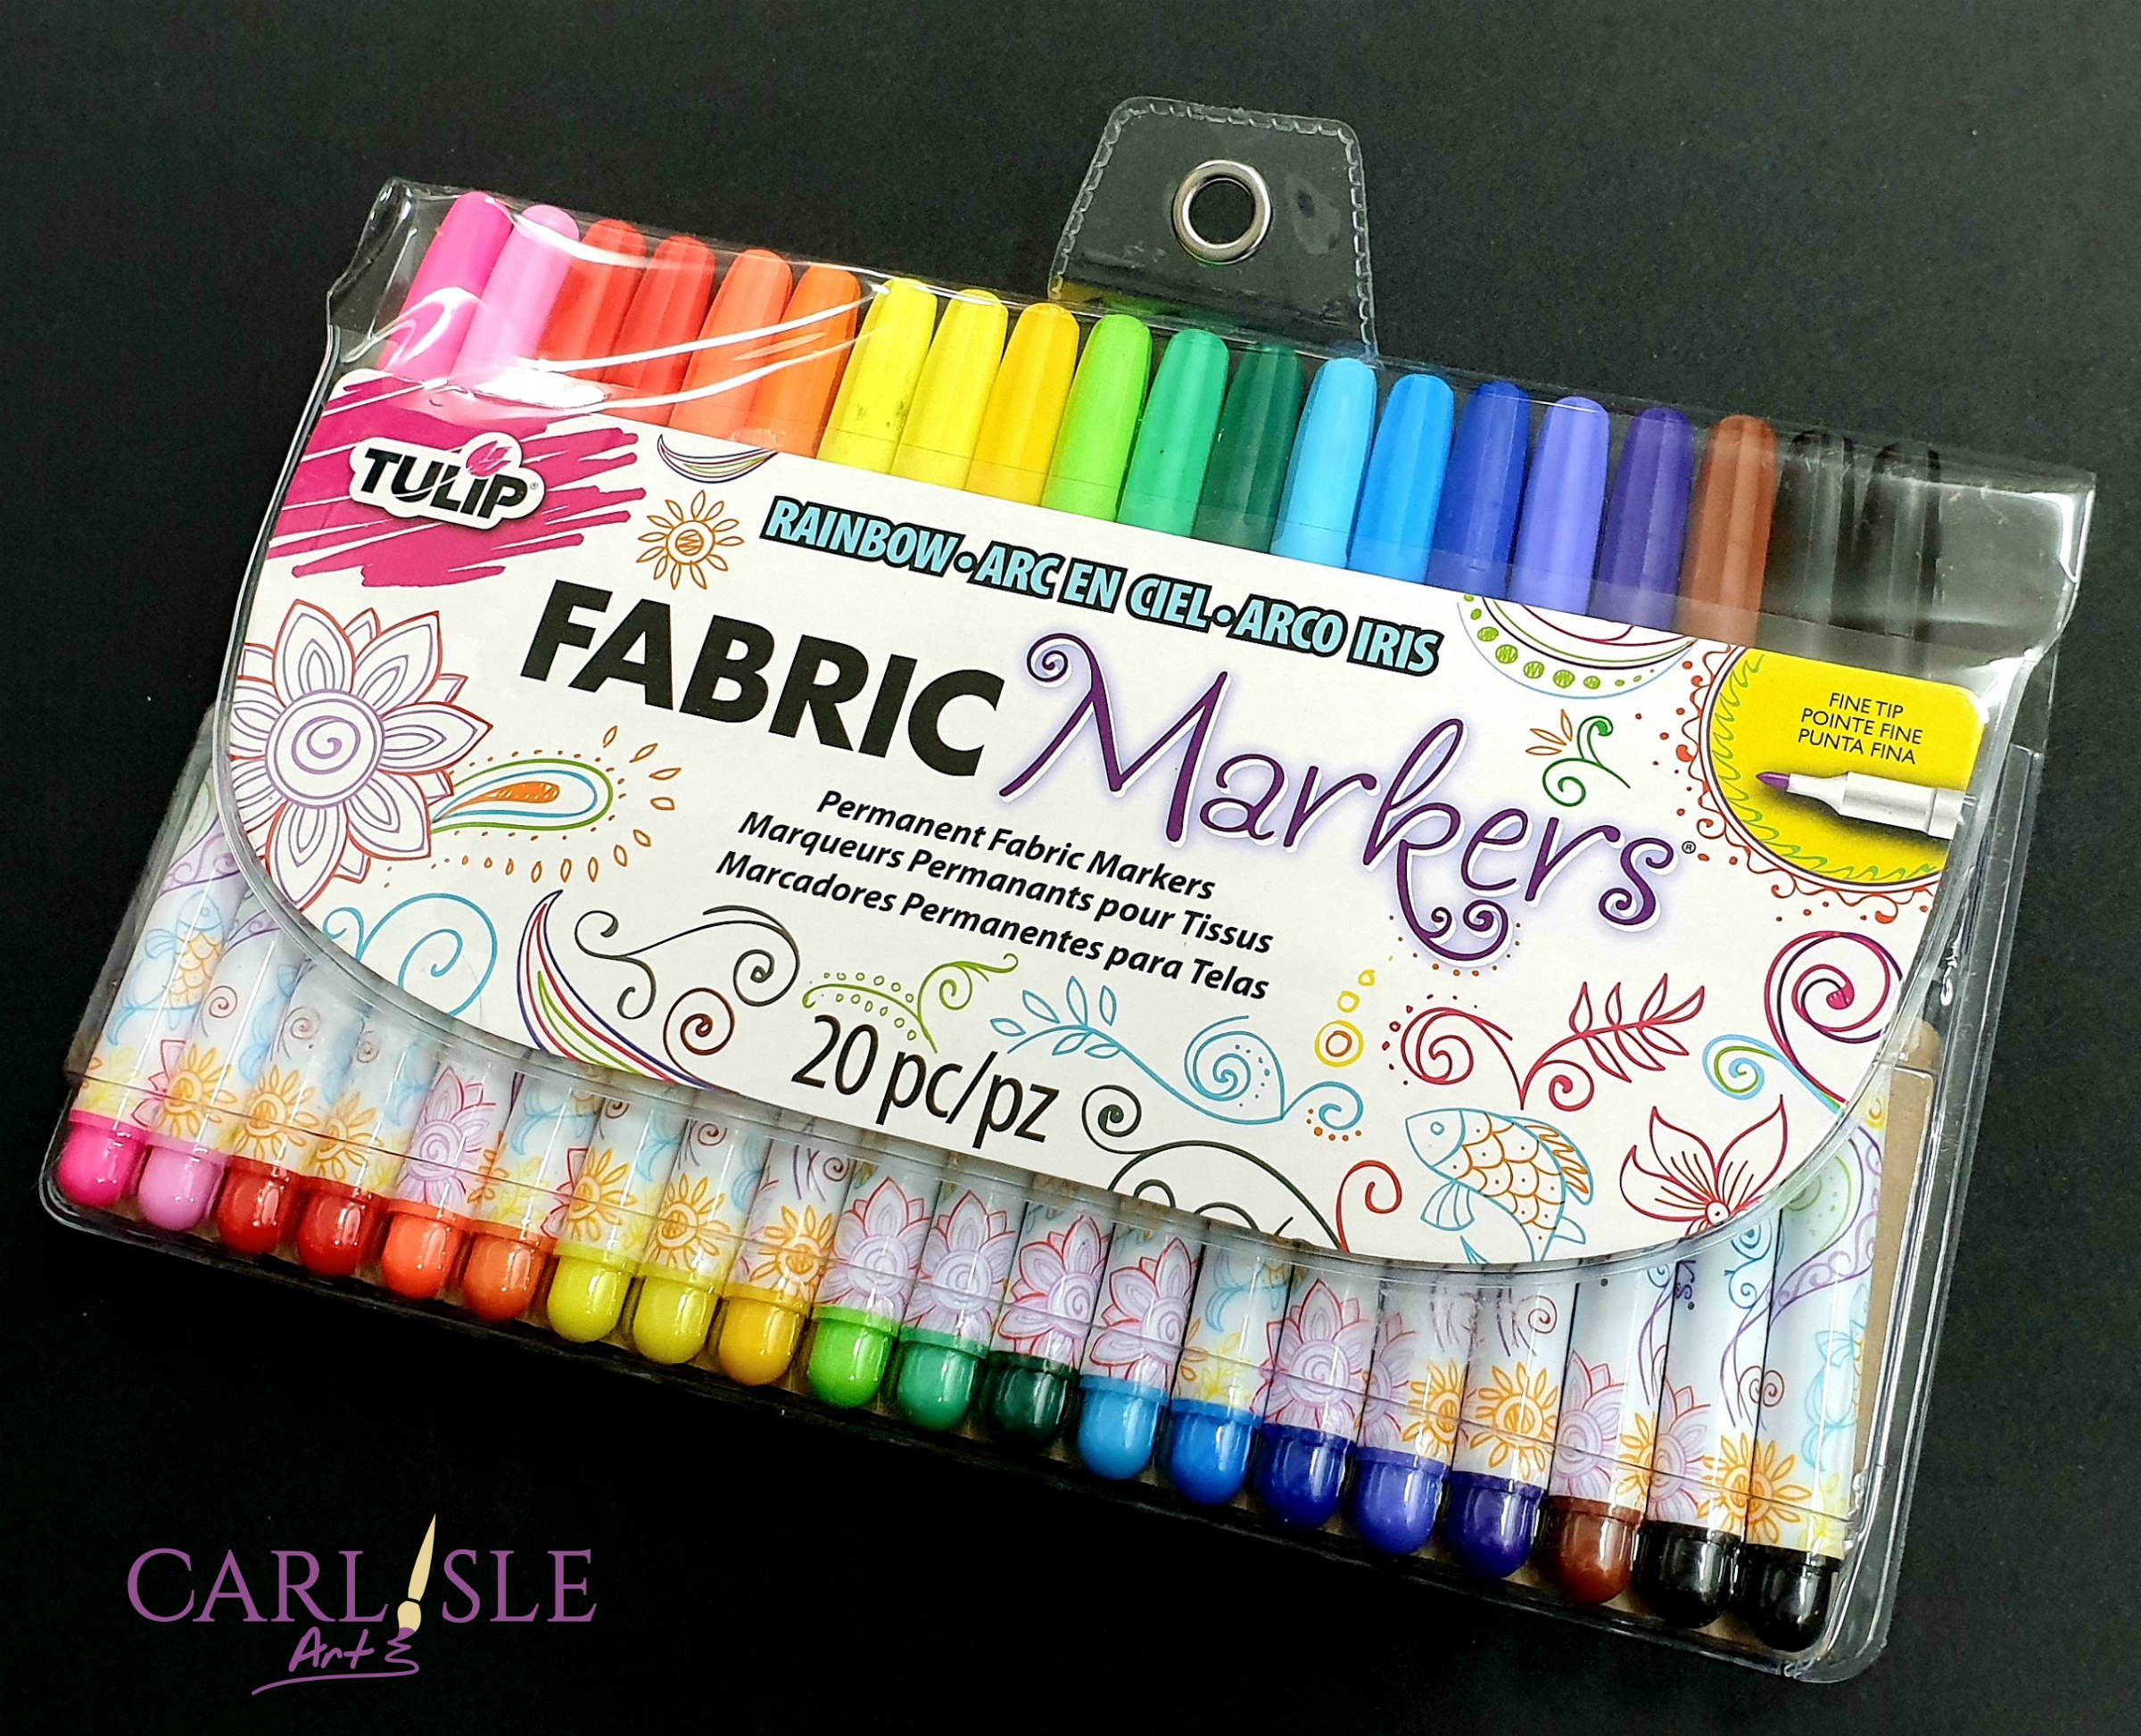 Tulip Fine Tip Rainbow Permanent Fabric Markers 20 Pack